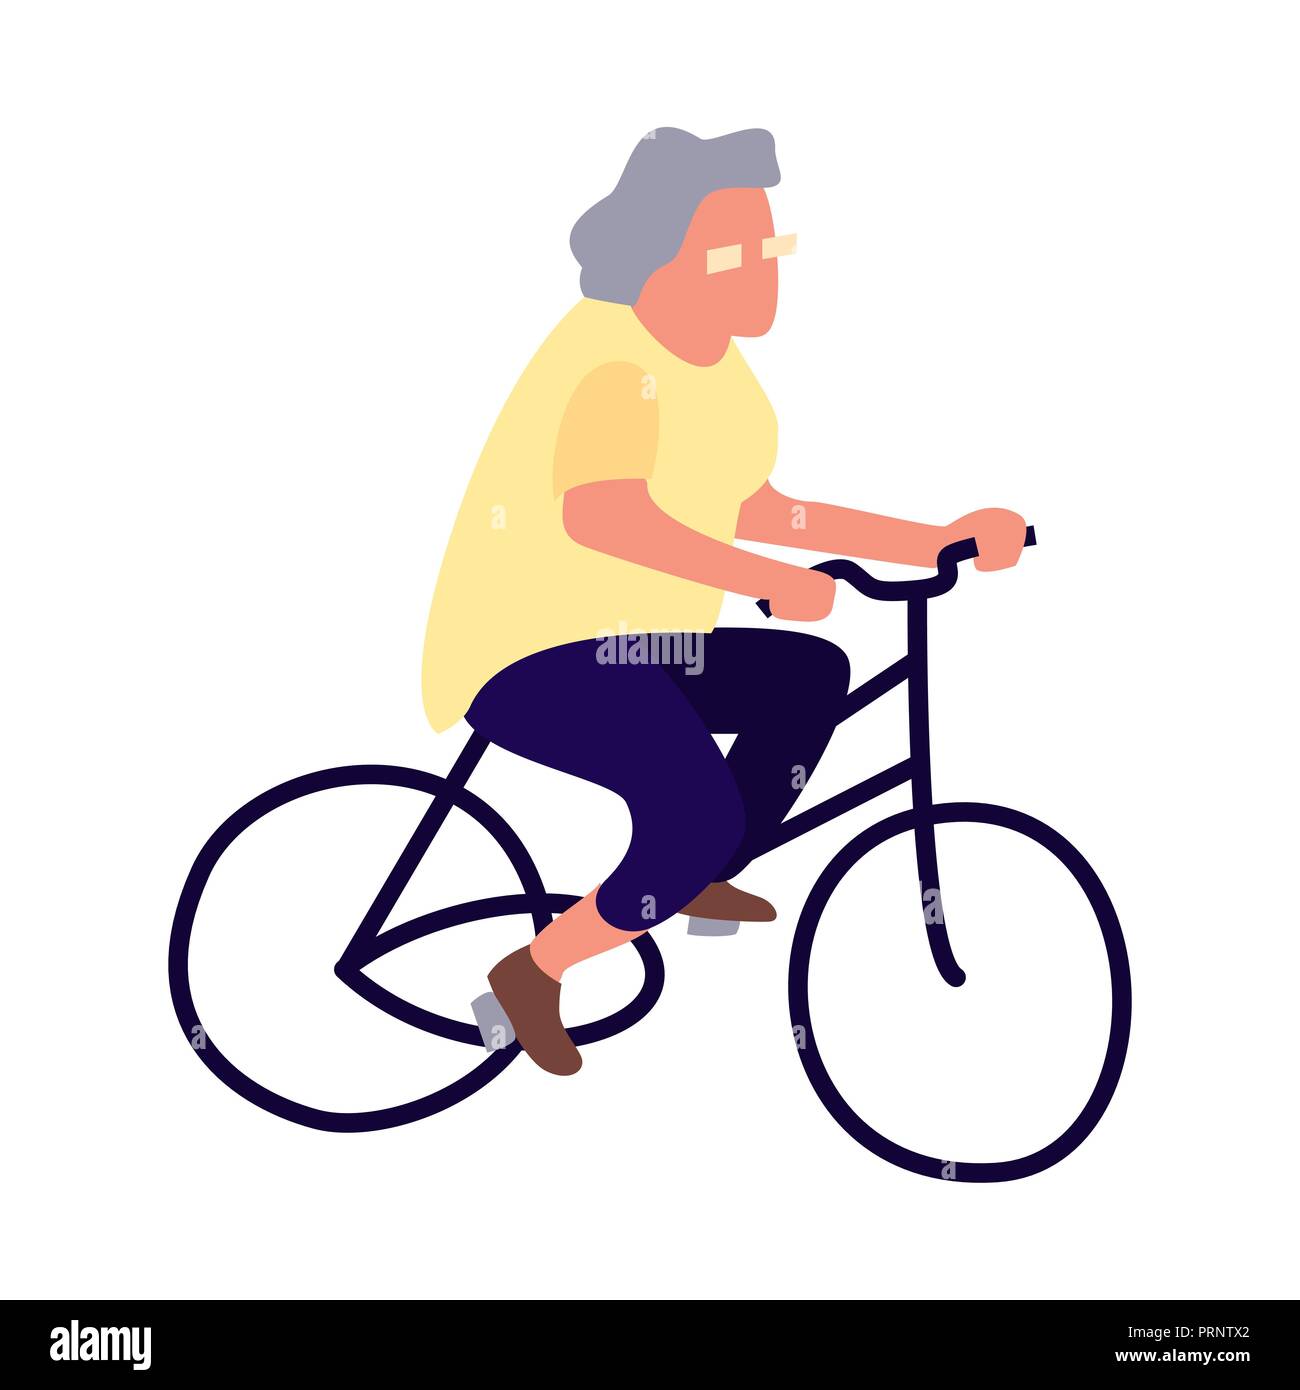 Elderly woman on a bicycle. Activity of the elderly concept. Senior female lifestyle. Mature cyclist leads a healthy lifestyle. Old lady on bike Stock Vector